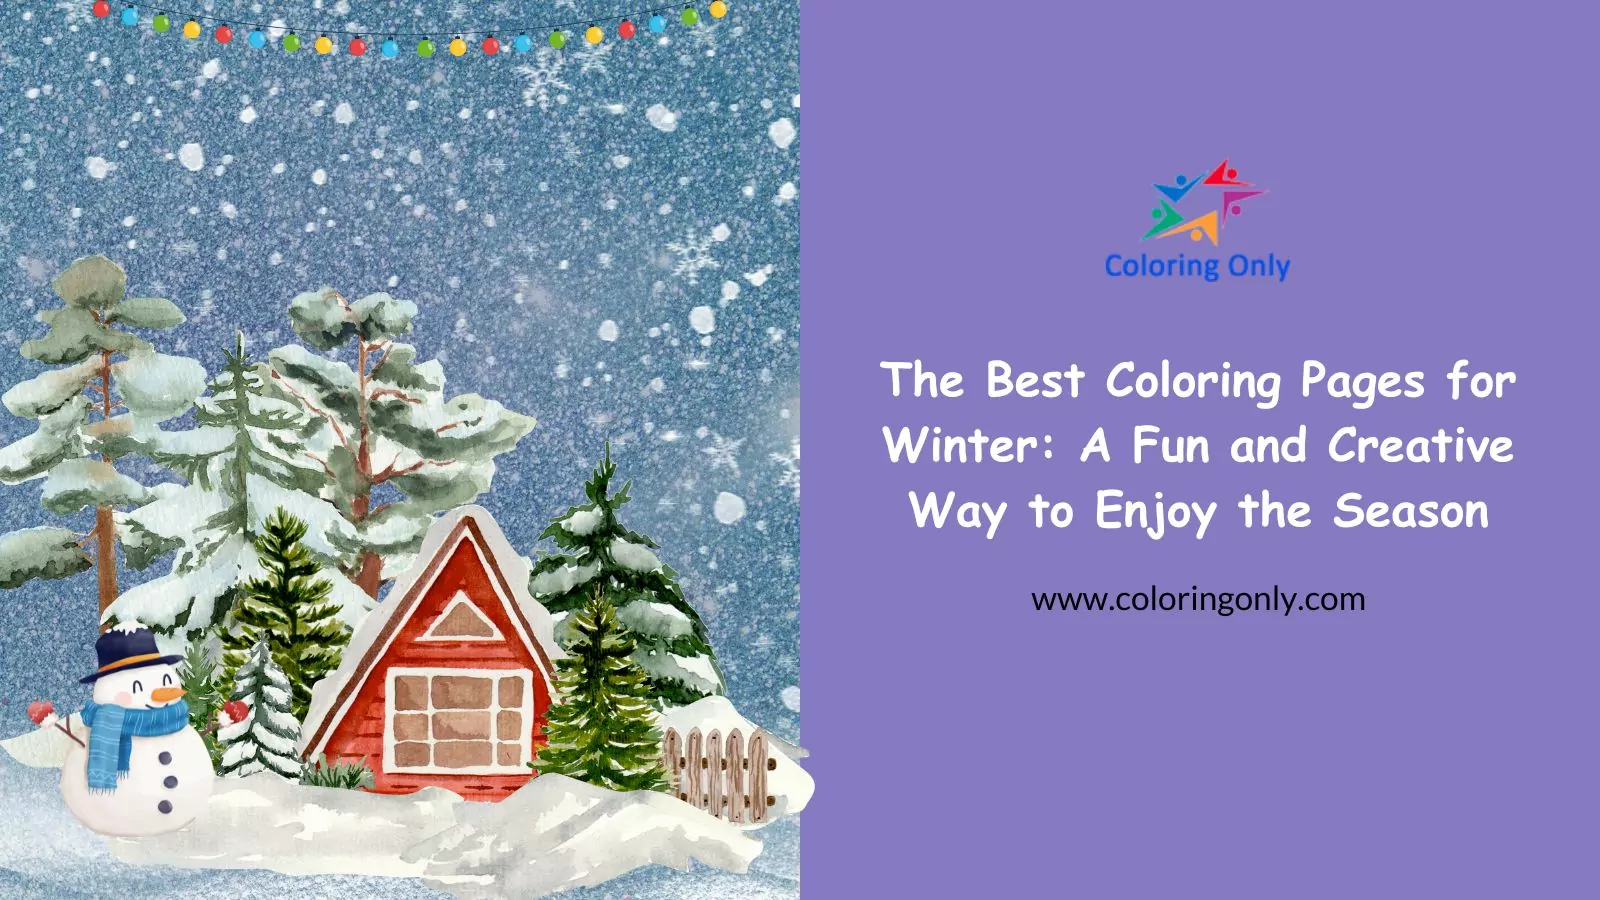 The Best Coloring Pages for Winter: A Fun and Creative Way to Enjoy the Season